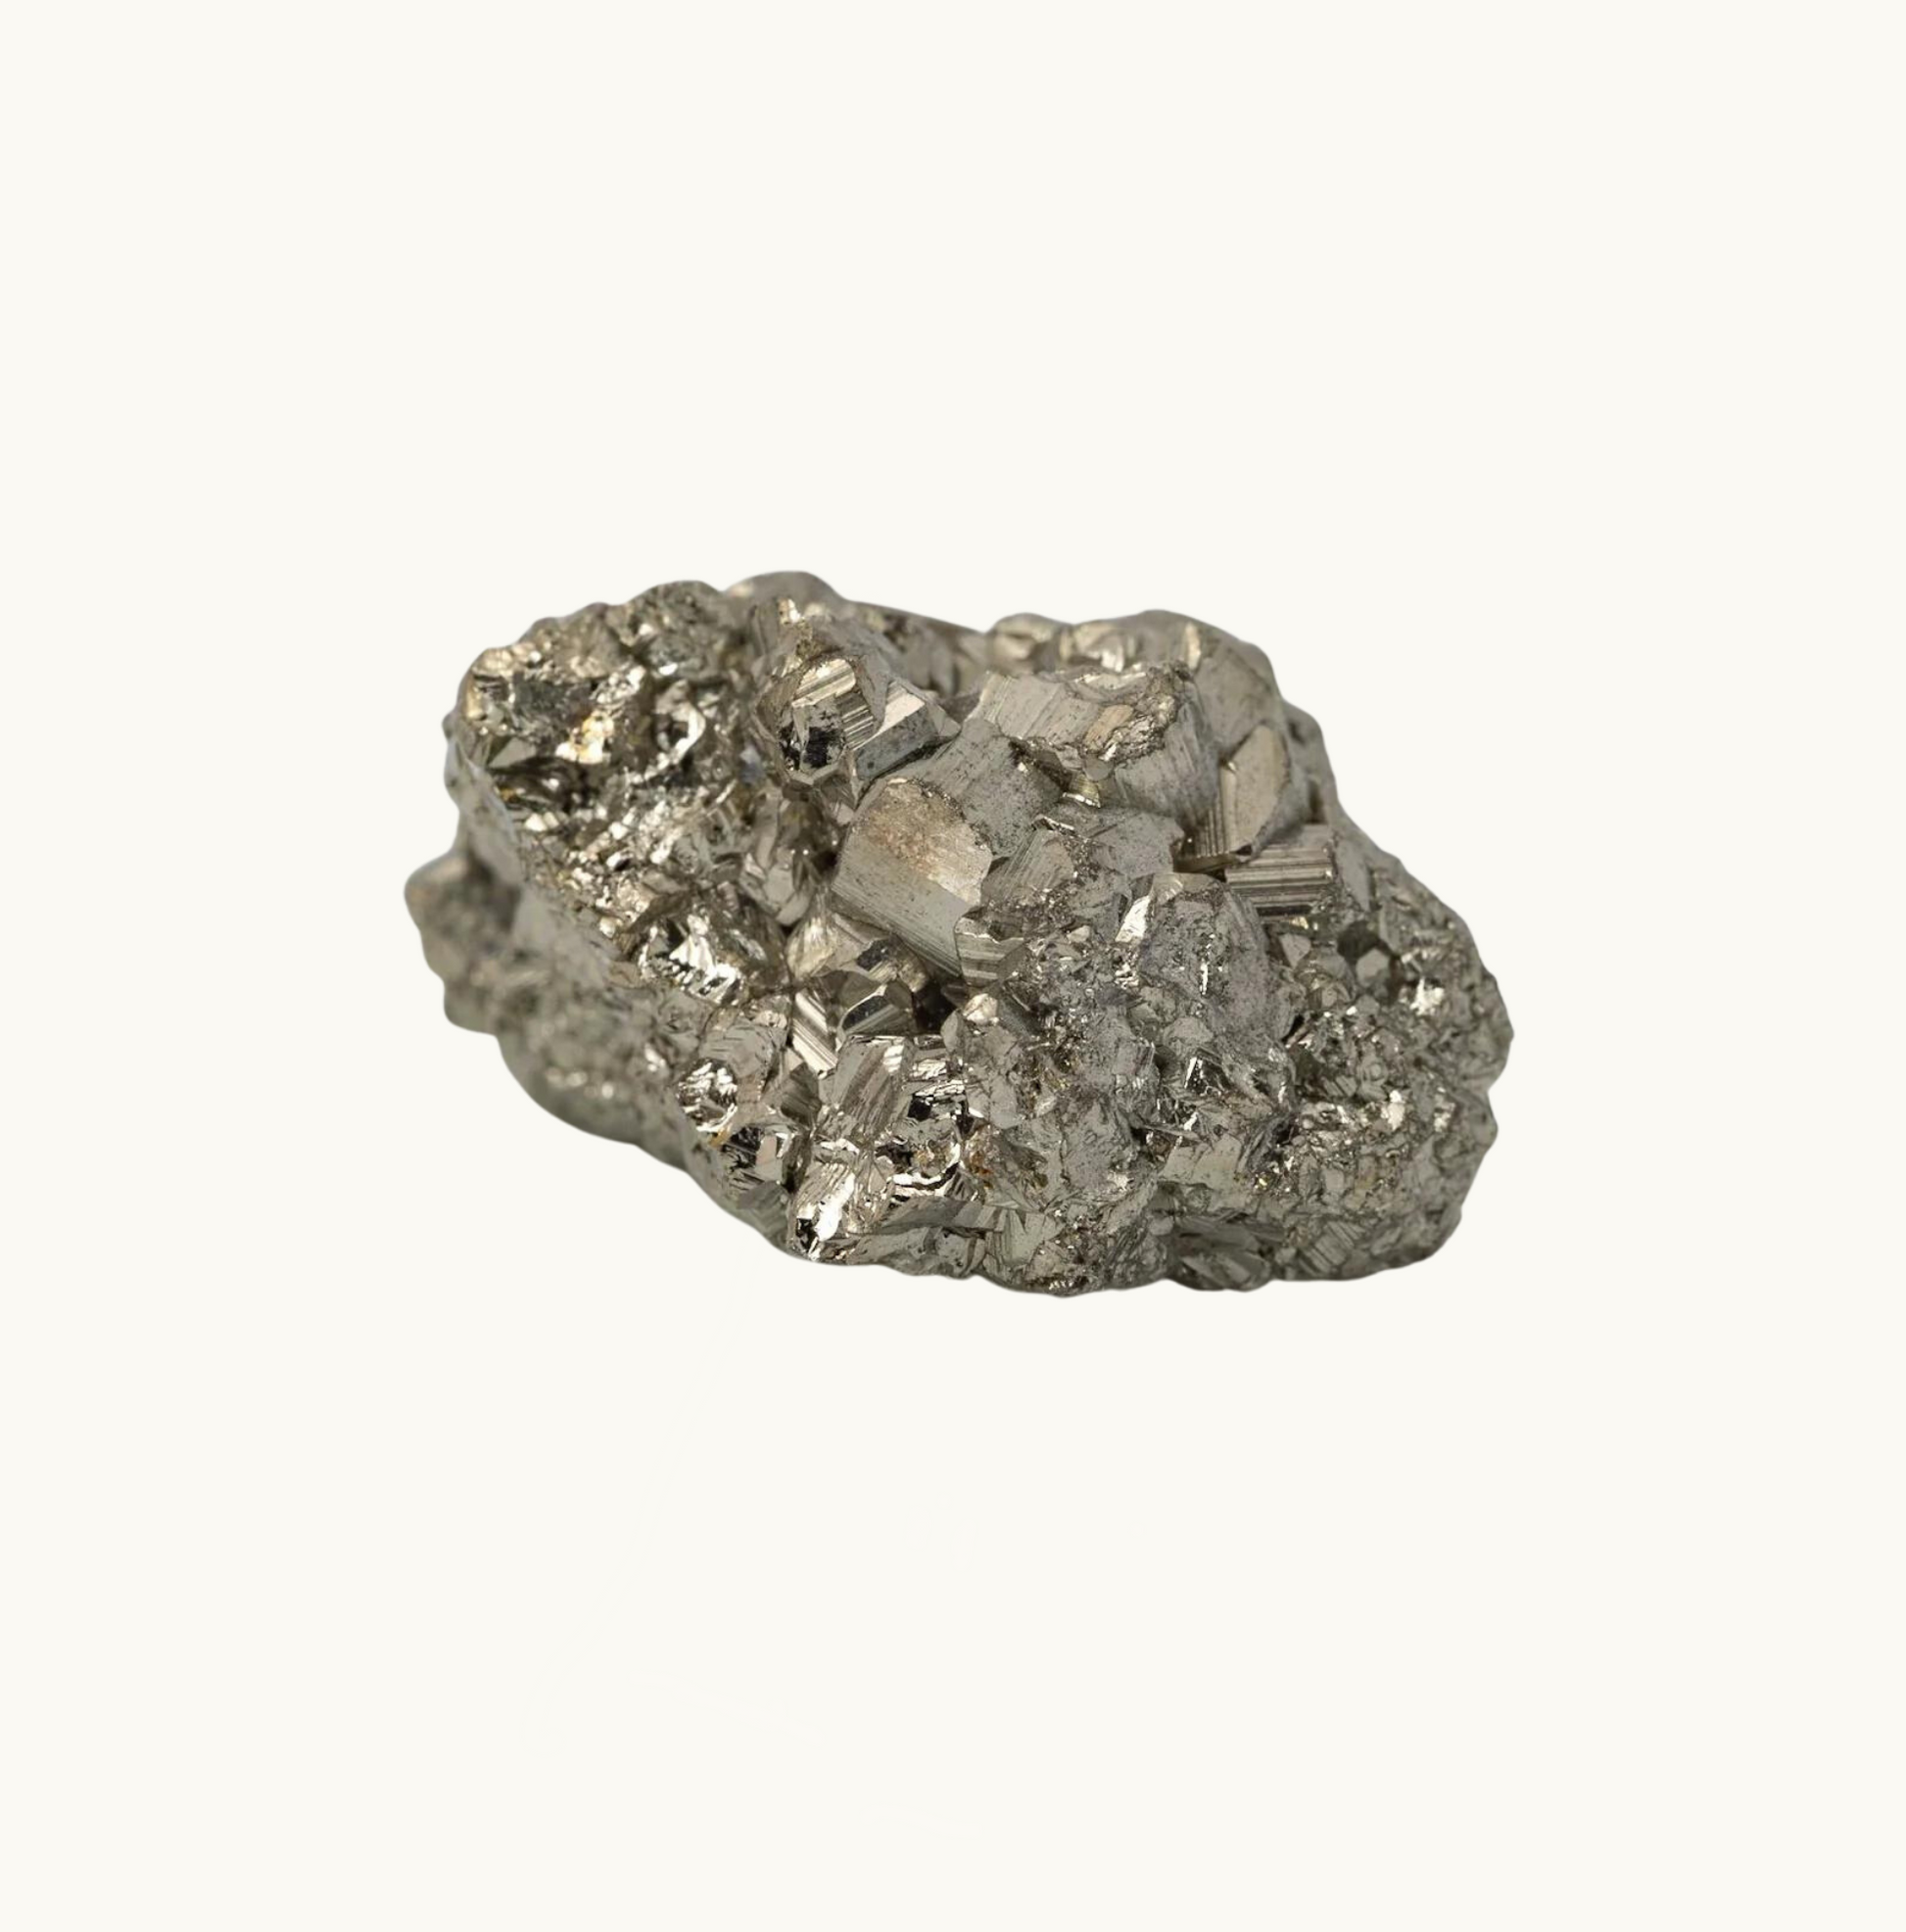  Image of pyrite crystal cluster